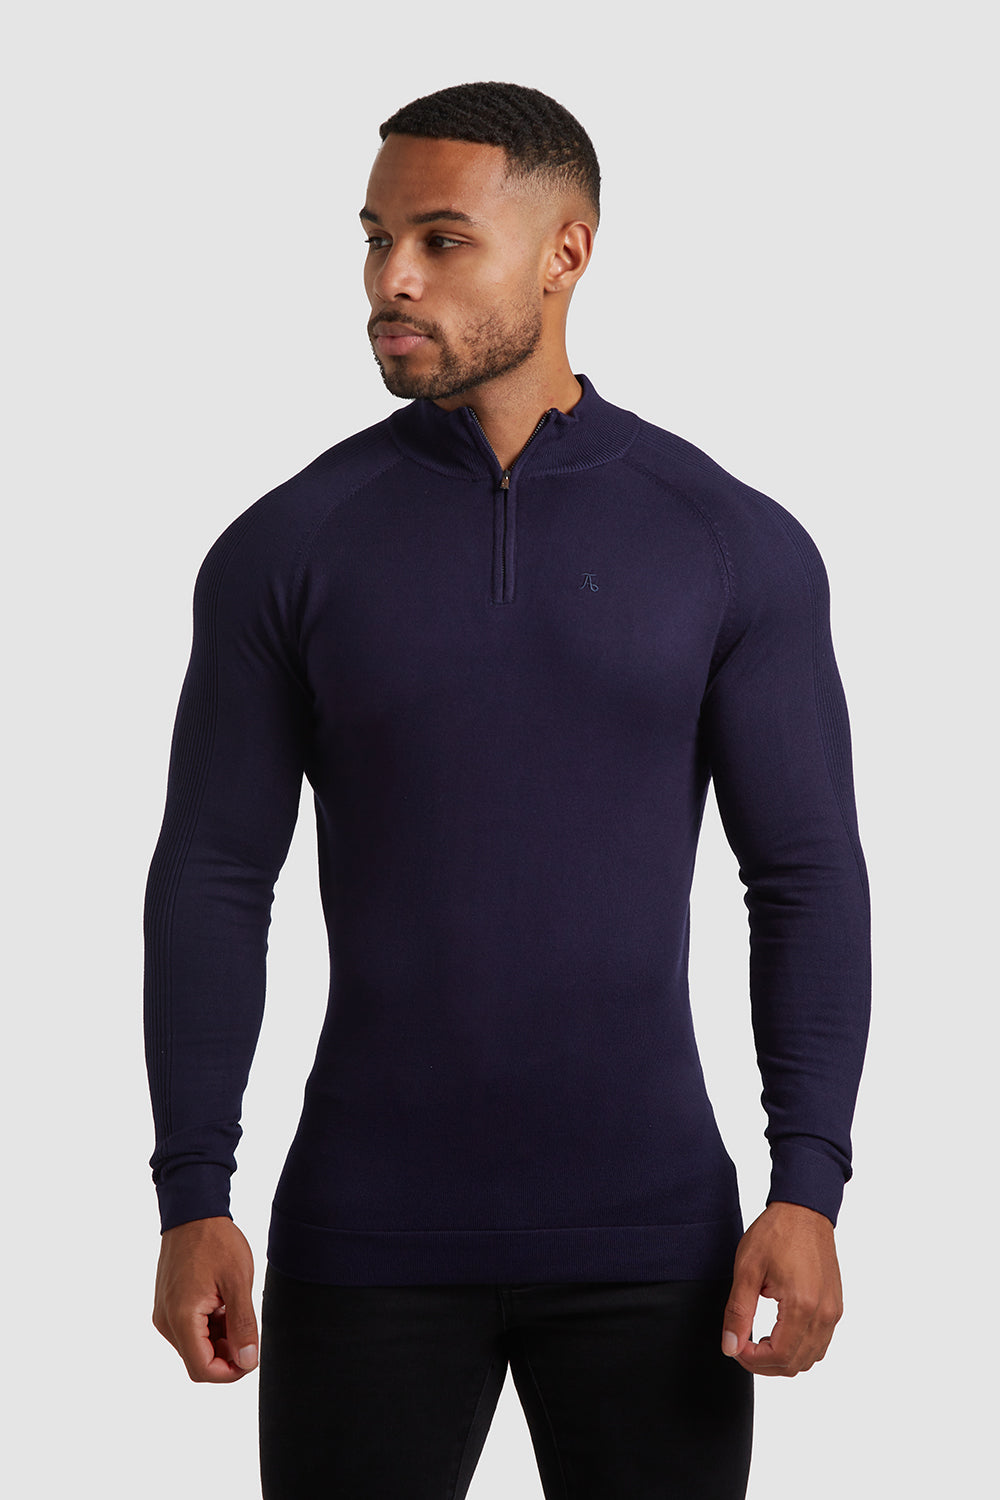 Placement Rib Half Zip Neck (LS) in Navy - TAILORED ATHLETE - ROW